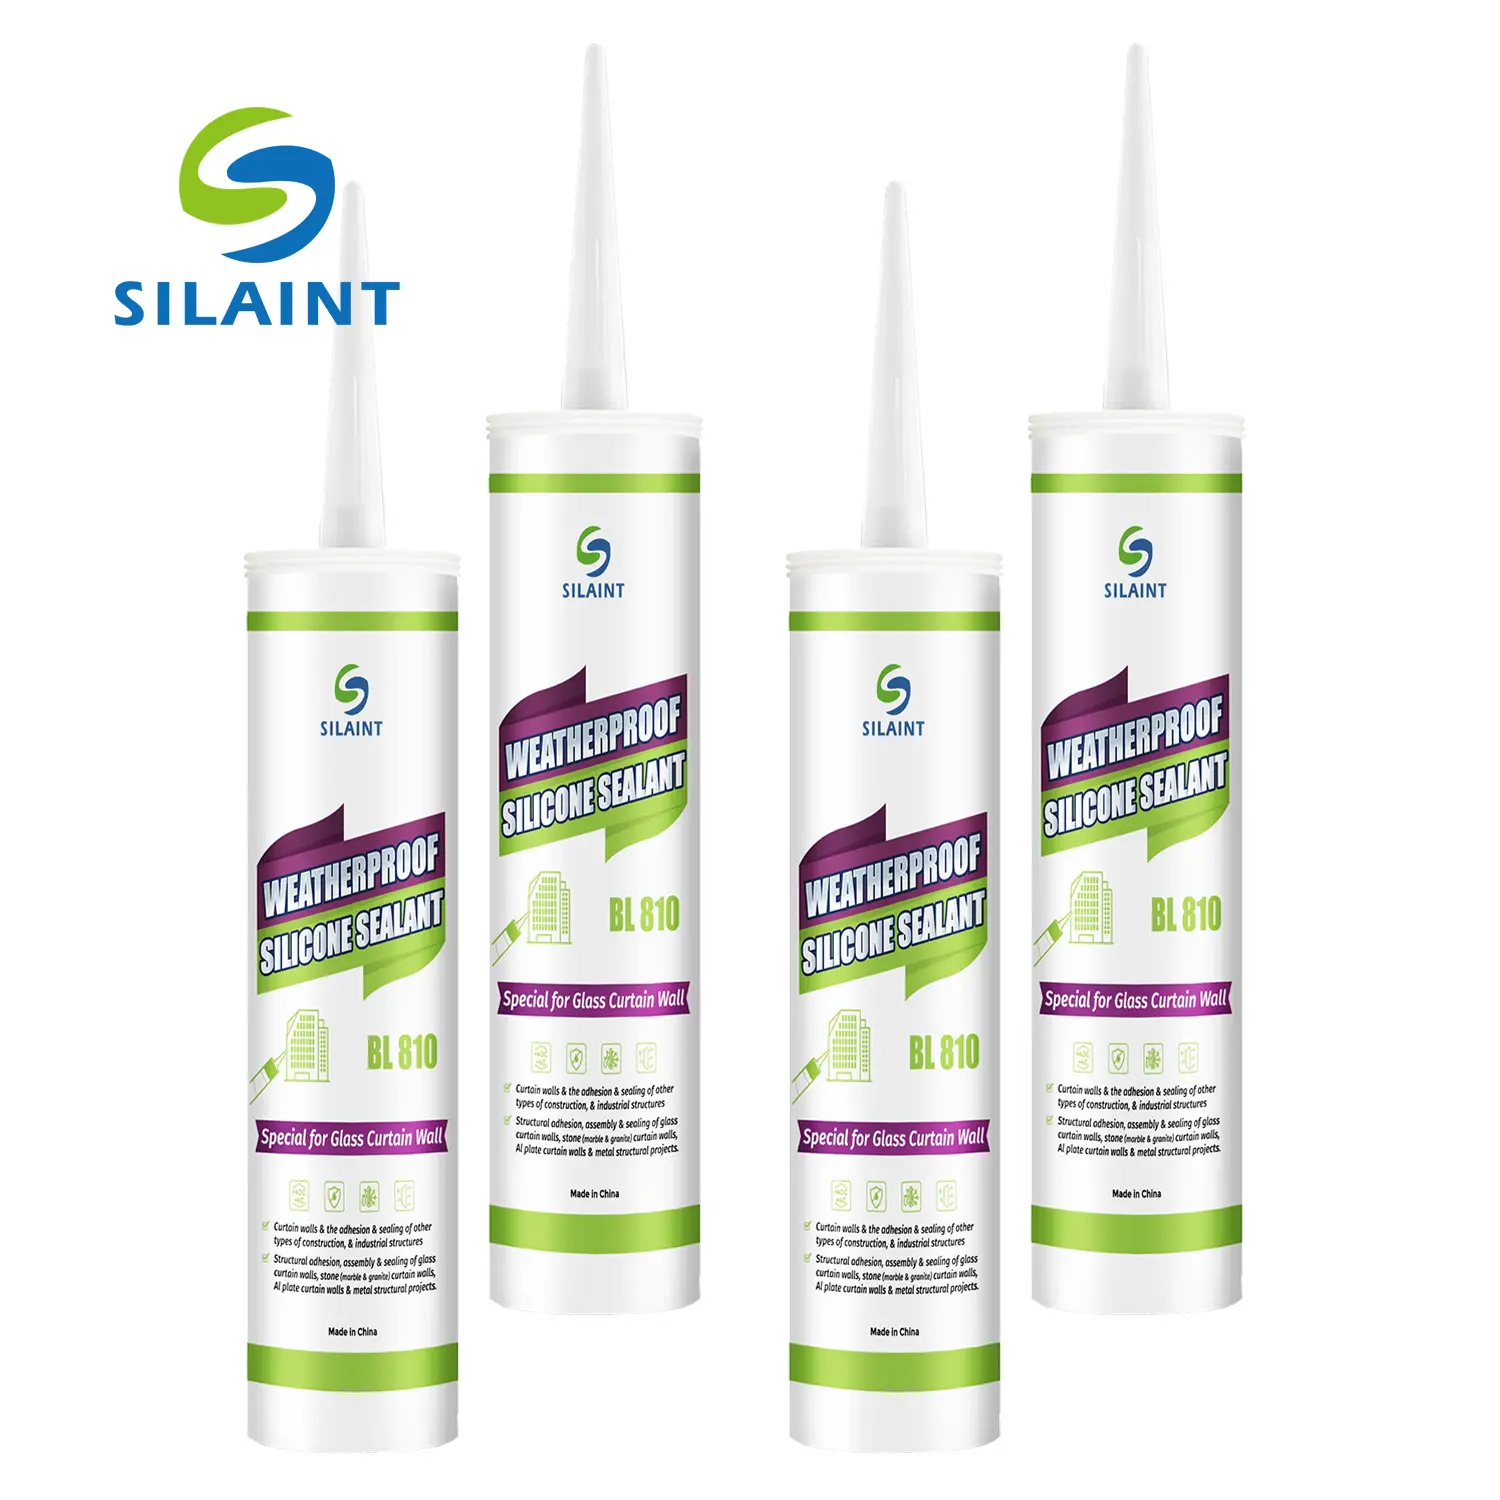 MH995 Silicone sealant weather resistance bonding sealing black structural adhesive roofing caulk glass silicone sealant